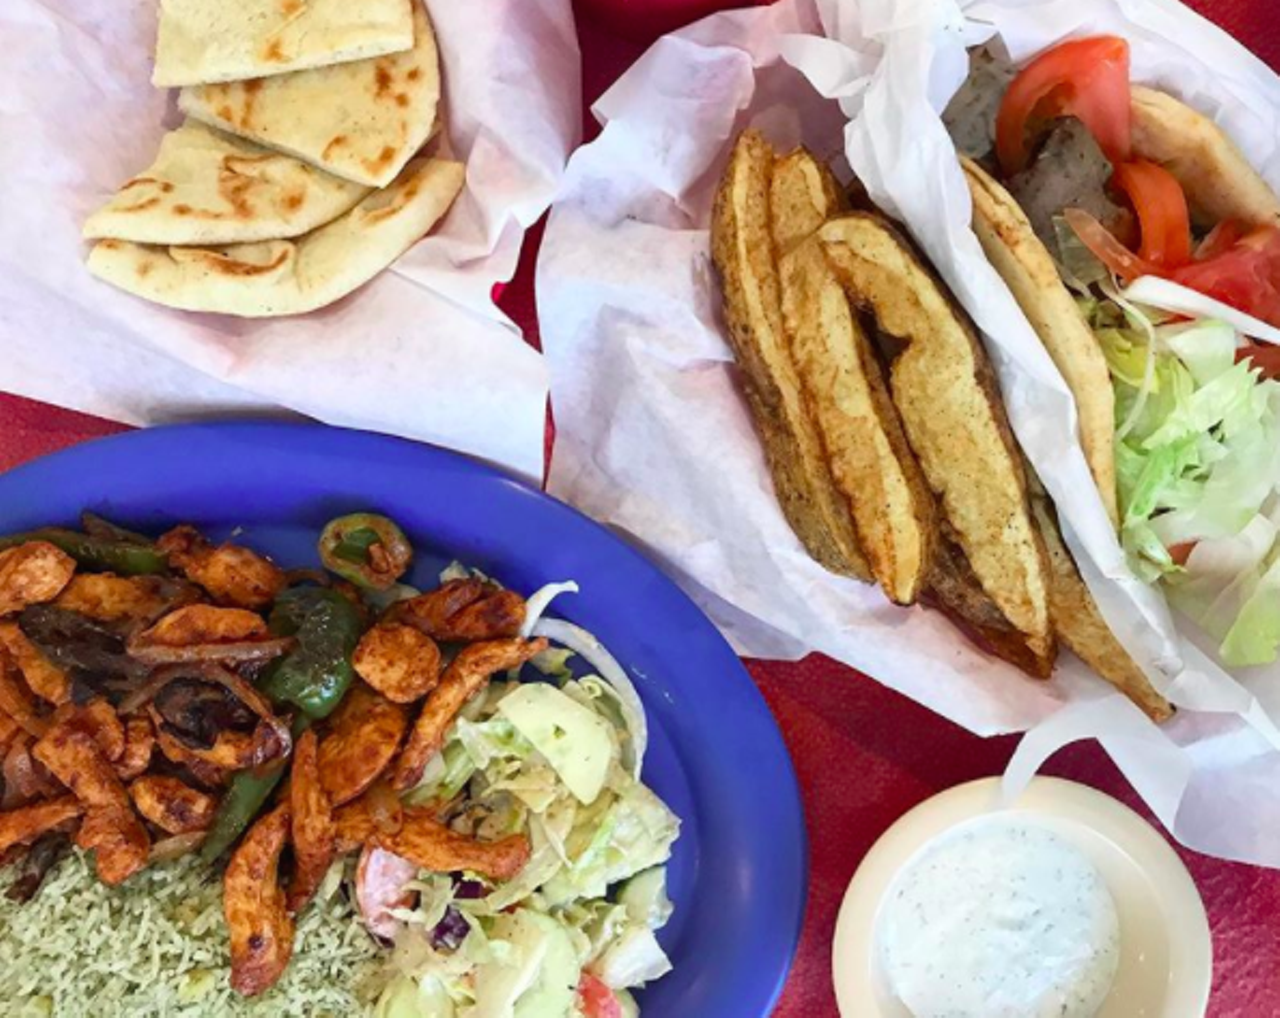 Casa del Kabob
1027 SW Military Dr., (210) 921-1200, facebook.com
No need to hop in the car to find Mediterranean food in the Medical Center, Casa del Kabob is where it’s at. Treat yourself to some Persian fare, you must try the falafel – either as an appetizer, plate or wrap.
Photo via Instagram / adriennei3